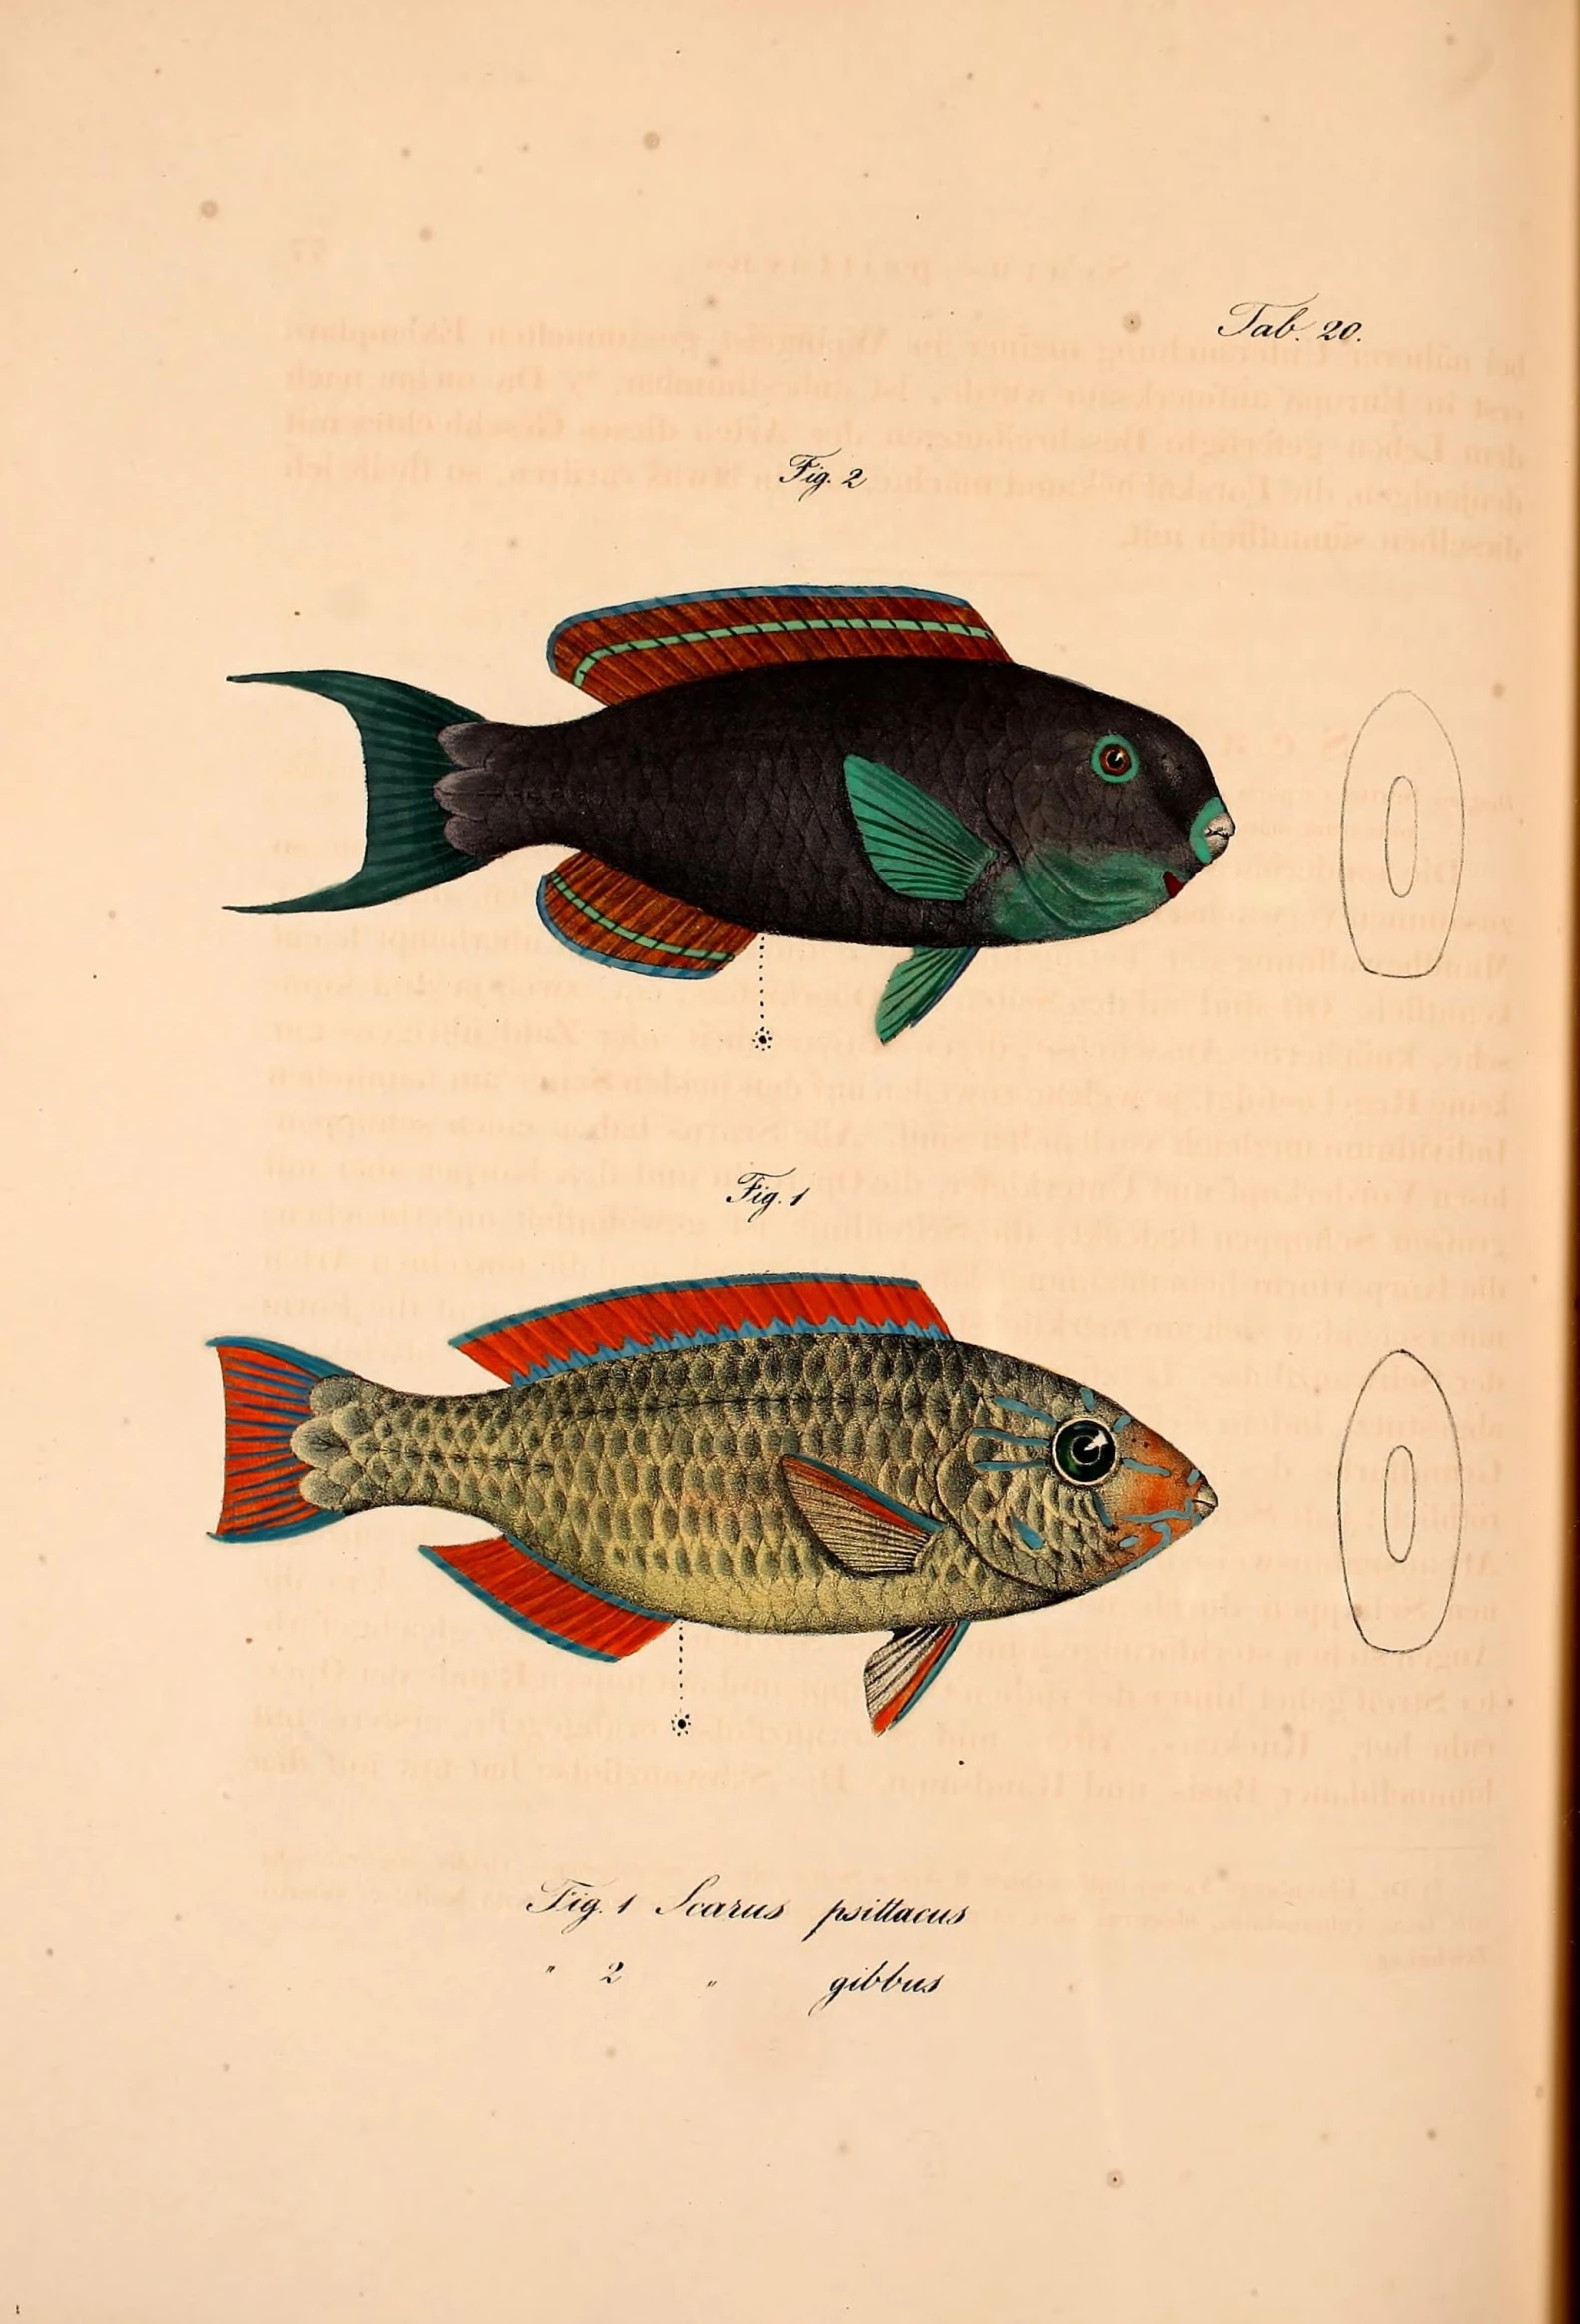 two fishes that have a green and red stripe under their fins